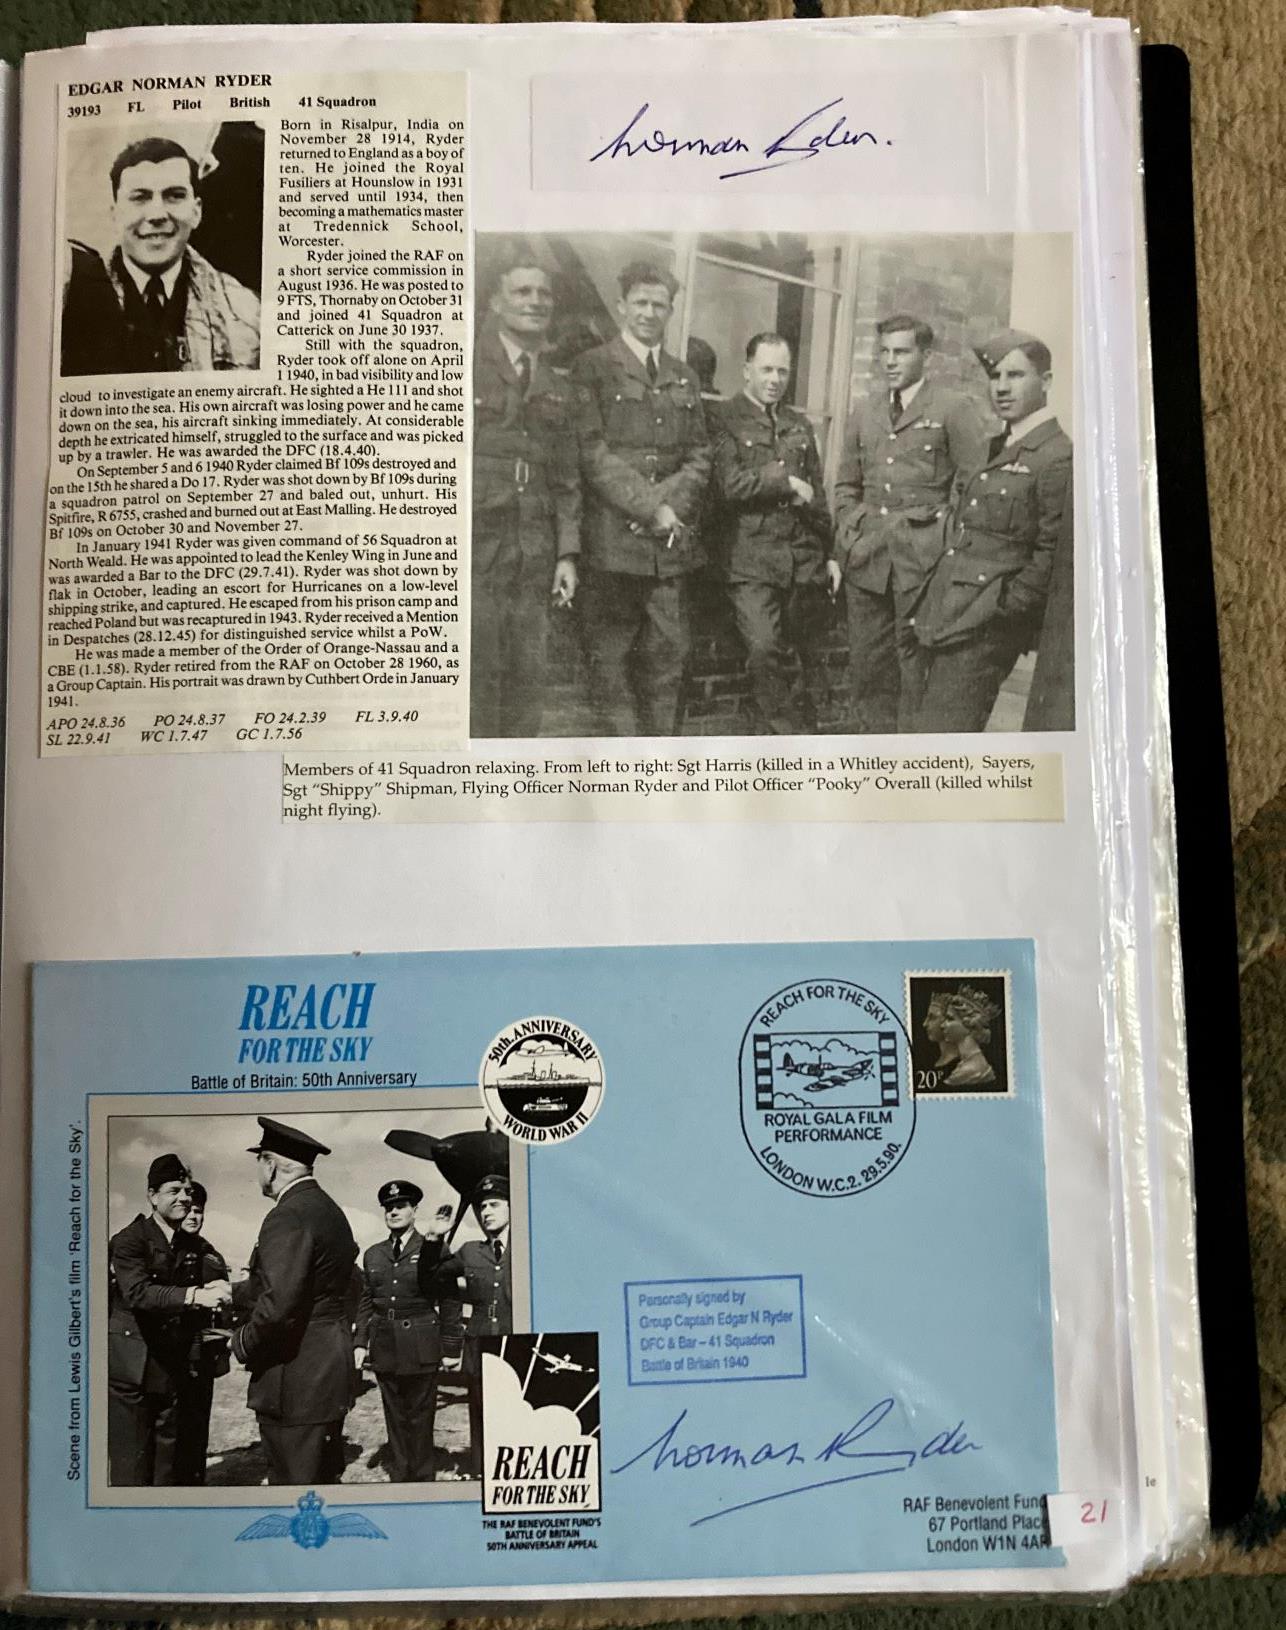 WW2 BOB fighter pilot Edgar Norman Ryder 41 Sqn signed Reach for the Sky cover and signature piece